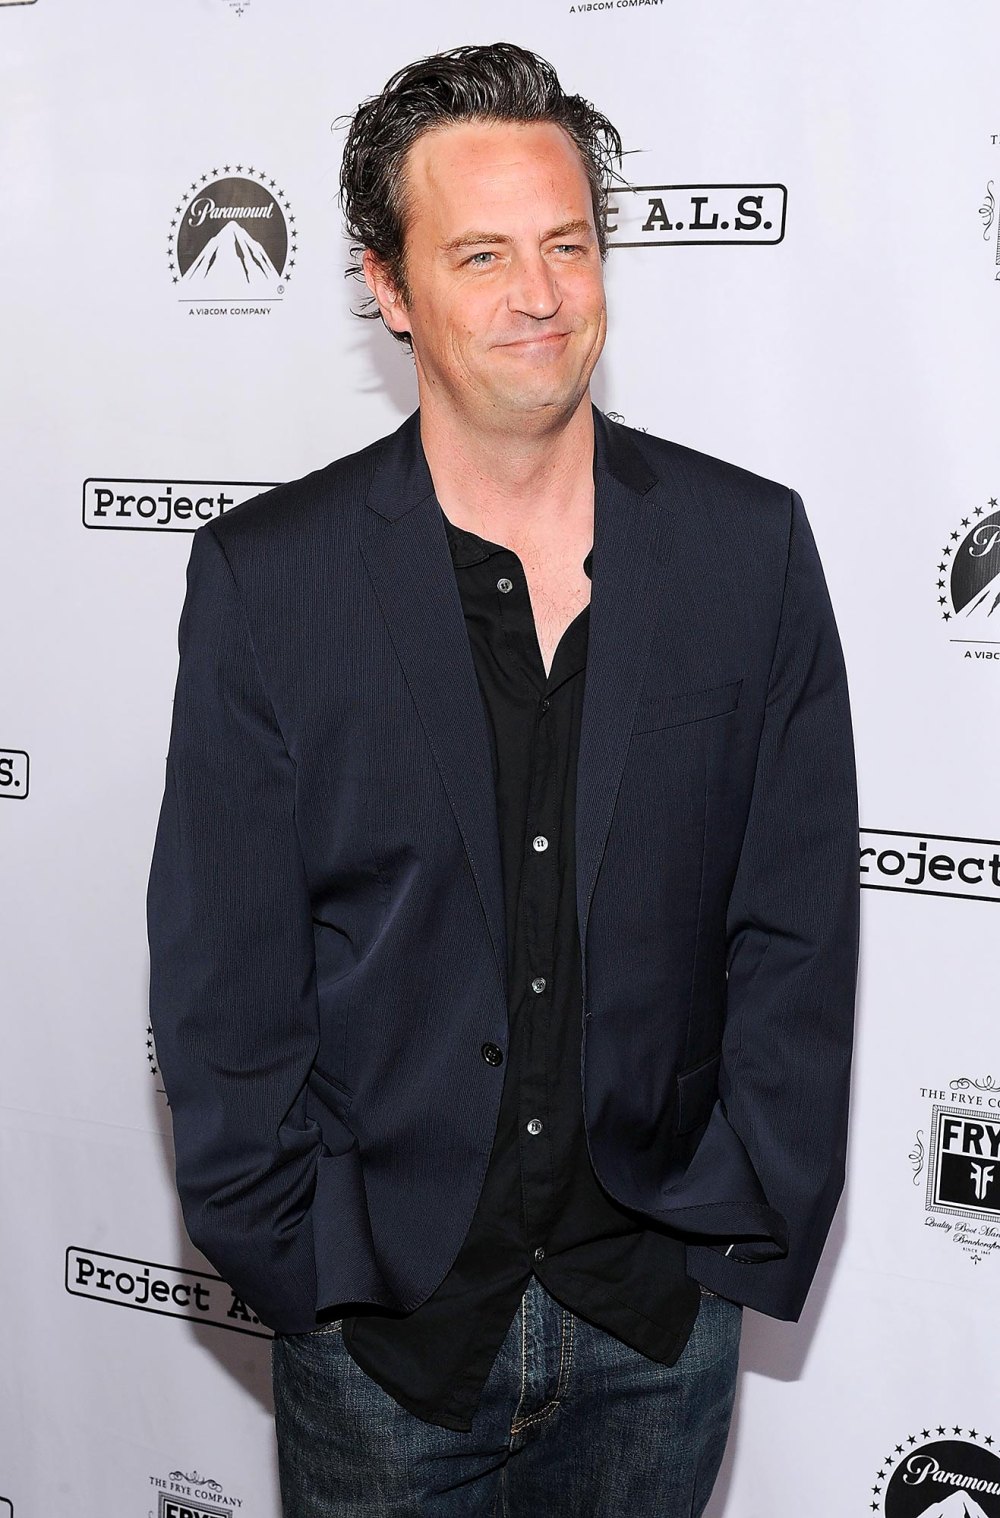 Matthew Perry Death Being Investigated By Law Enforcement